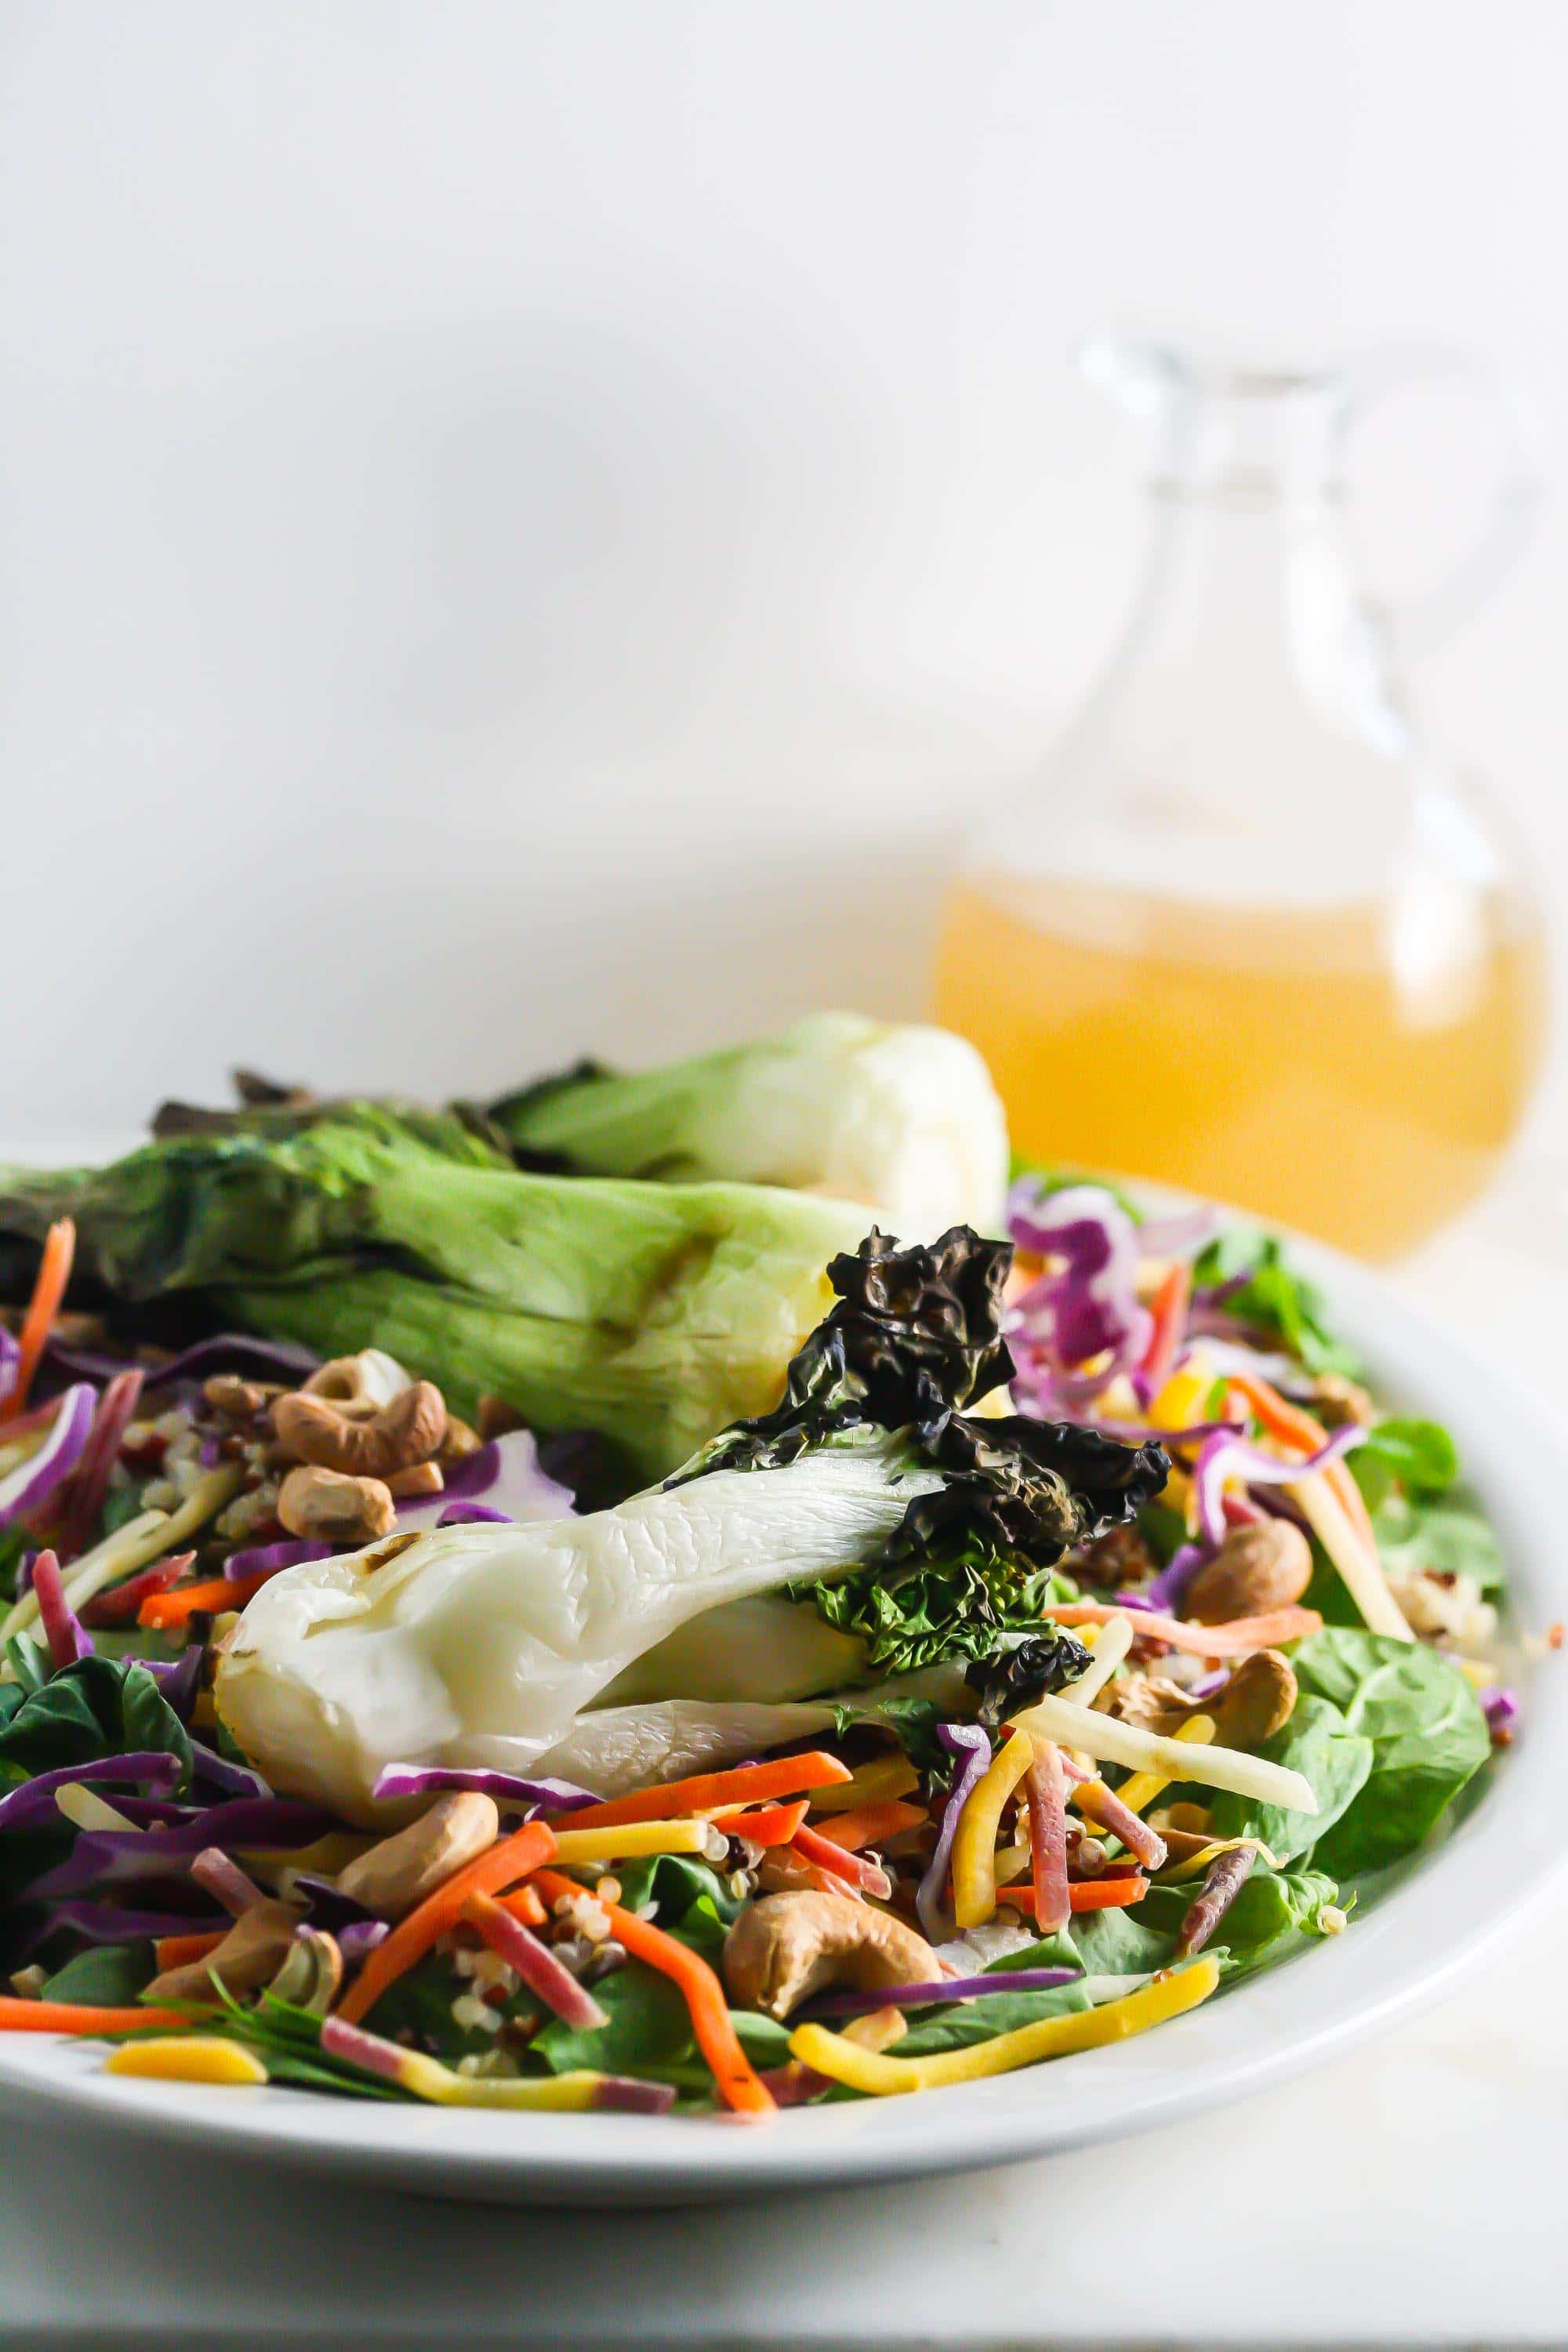 Grilled Baby Bok Choy Salad with Honey Miso Dressing from Lauren Kelly Nutrition